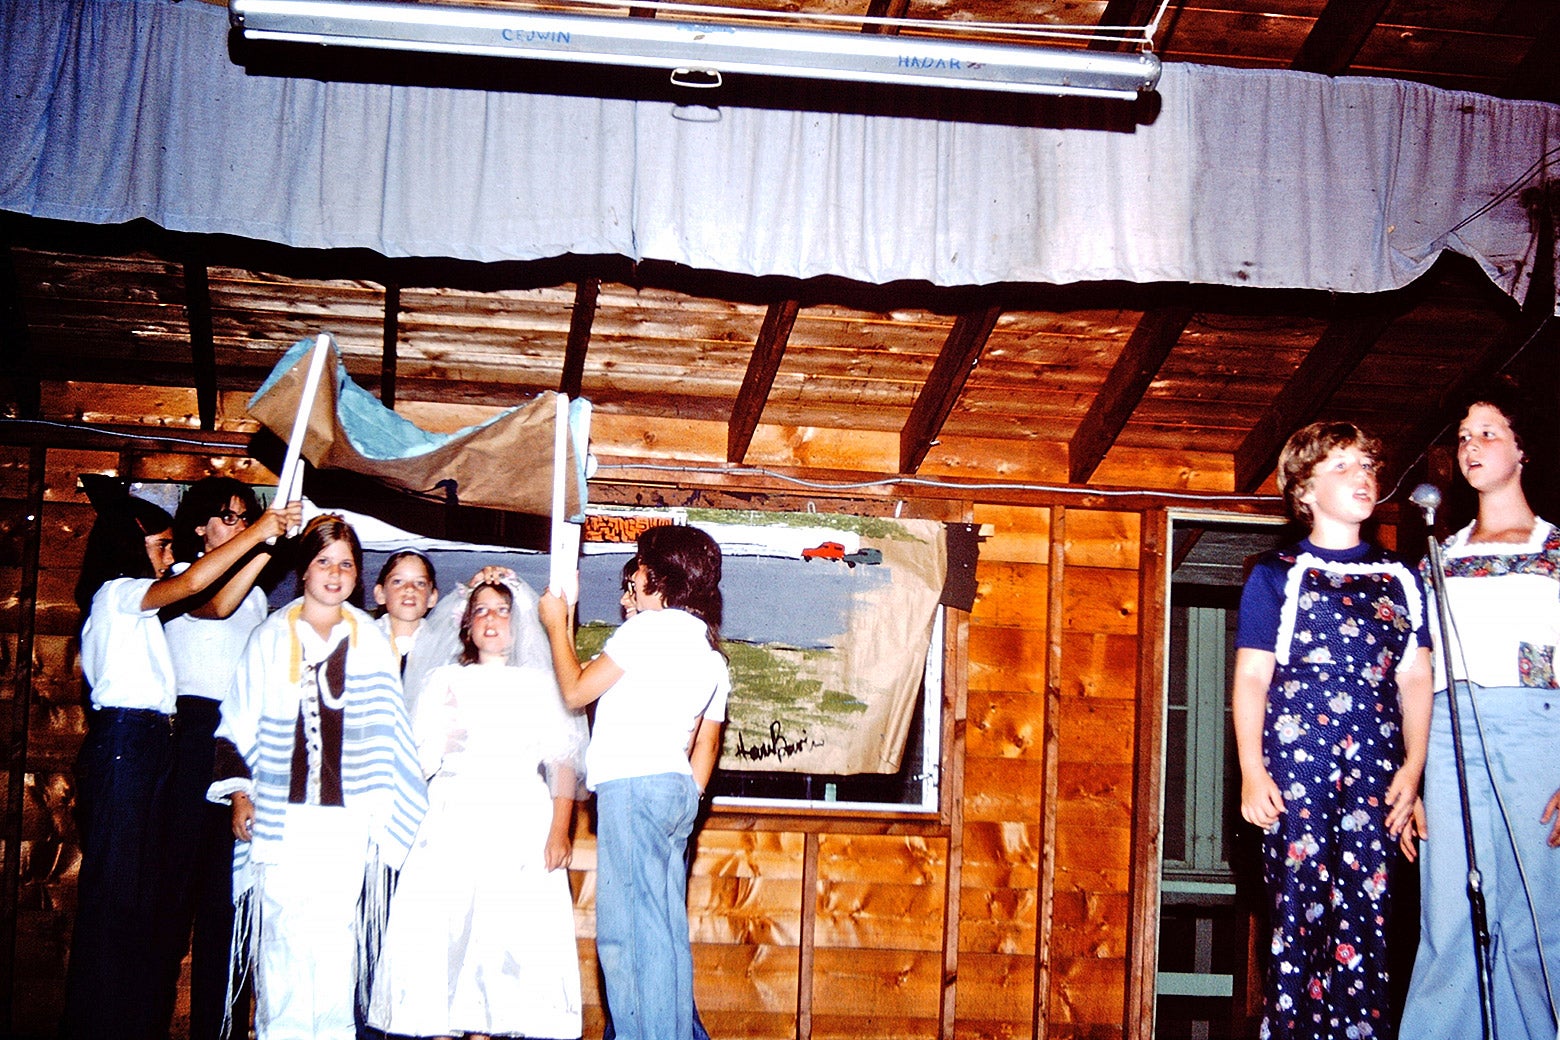 A simulated marriage at a Jewish summer camp.